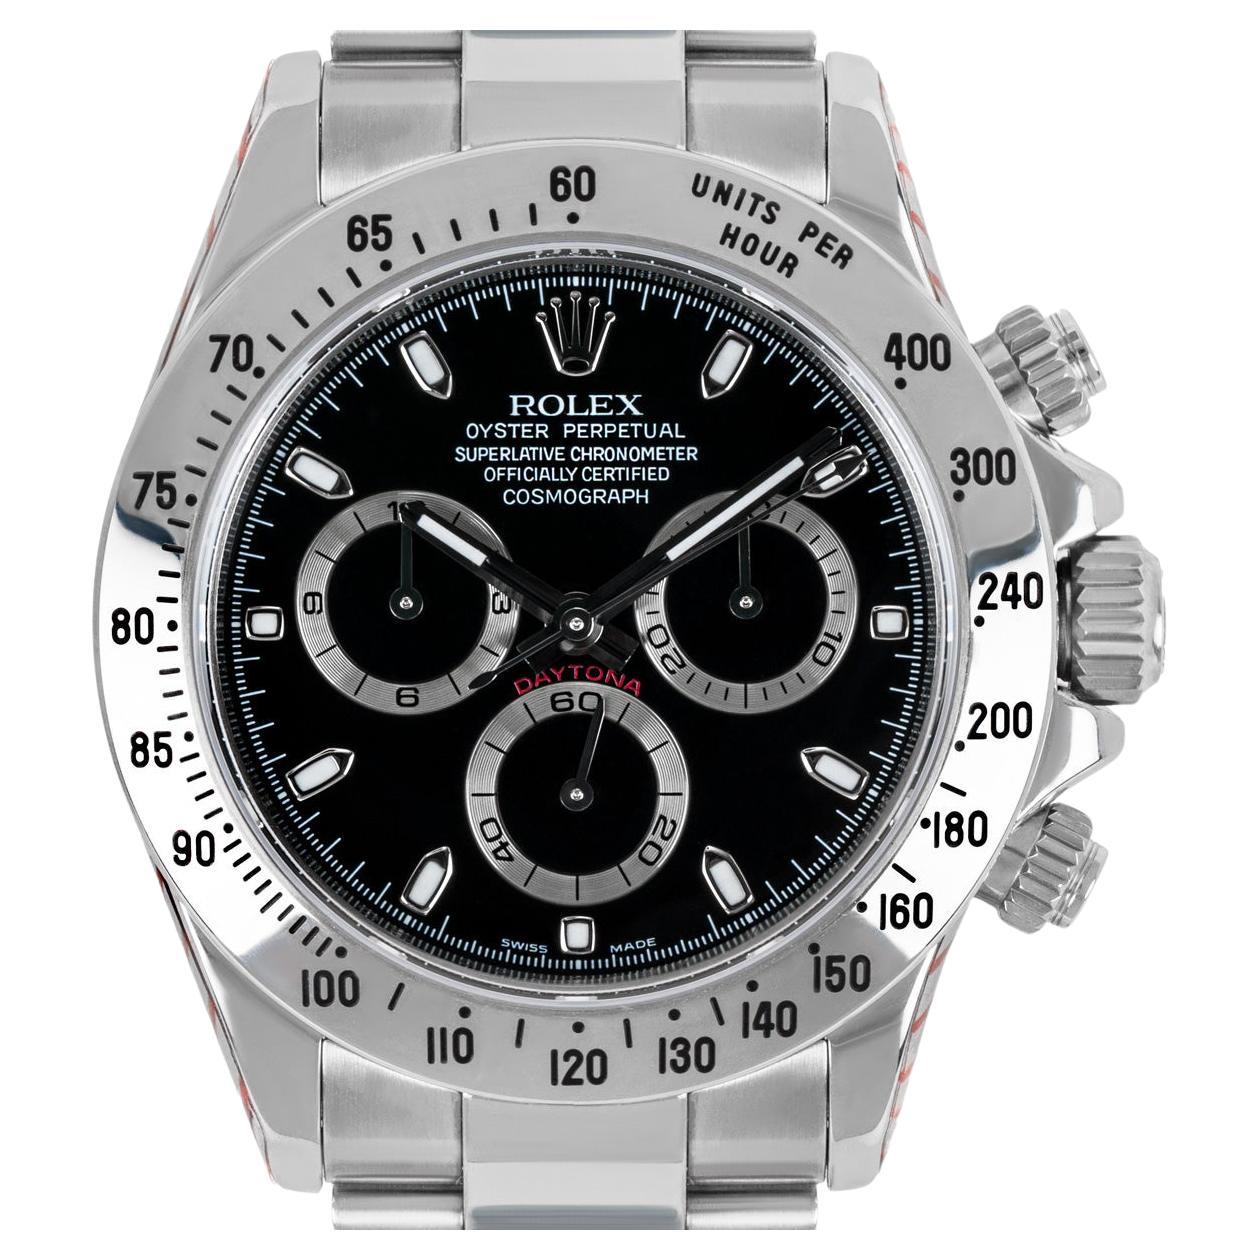 A predecessor to the 116500LN, this stainless steel Cosmograph Daytona by Rolex features a black dial. Also, featuring an engraved tachymetric scale, three counters and pushers, the Daytona was designed to be the ultimate timing tool for endurance